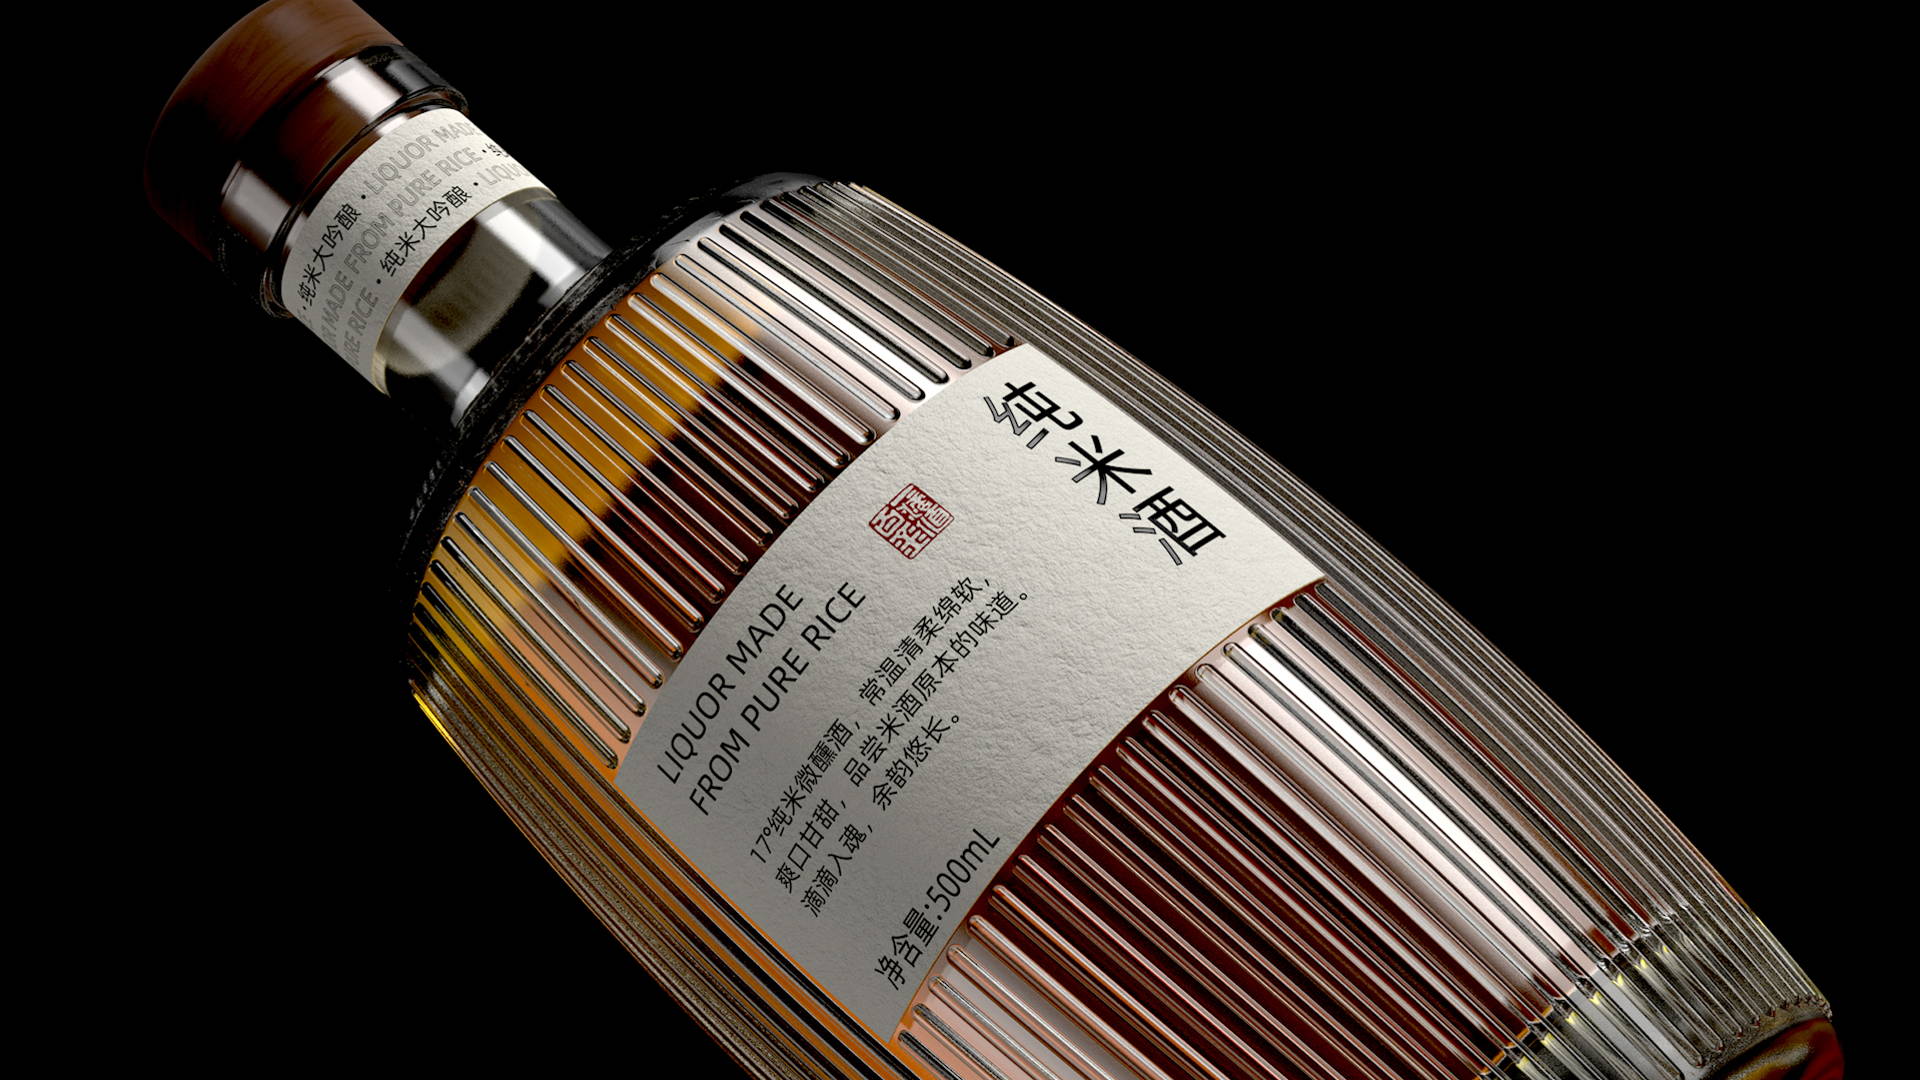 Featured image for Artistic Rice Wine Packaging Elegantly Uses Concave And Convex Patterns On The Bottle To Add Interest And Texture